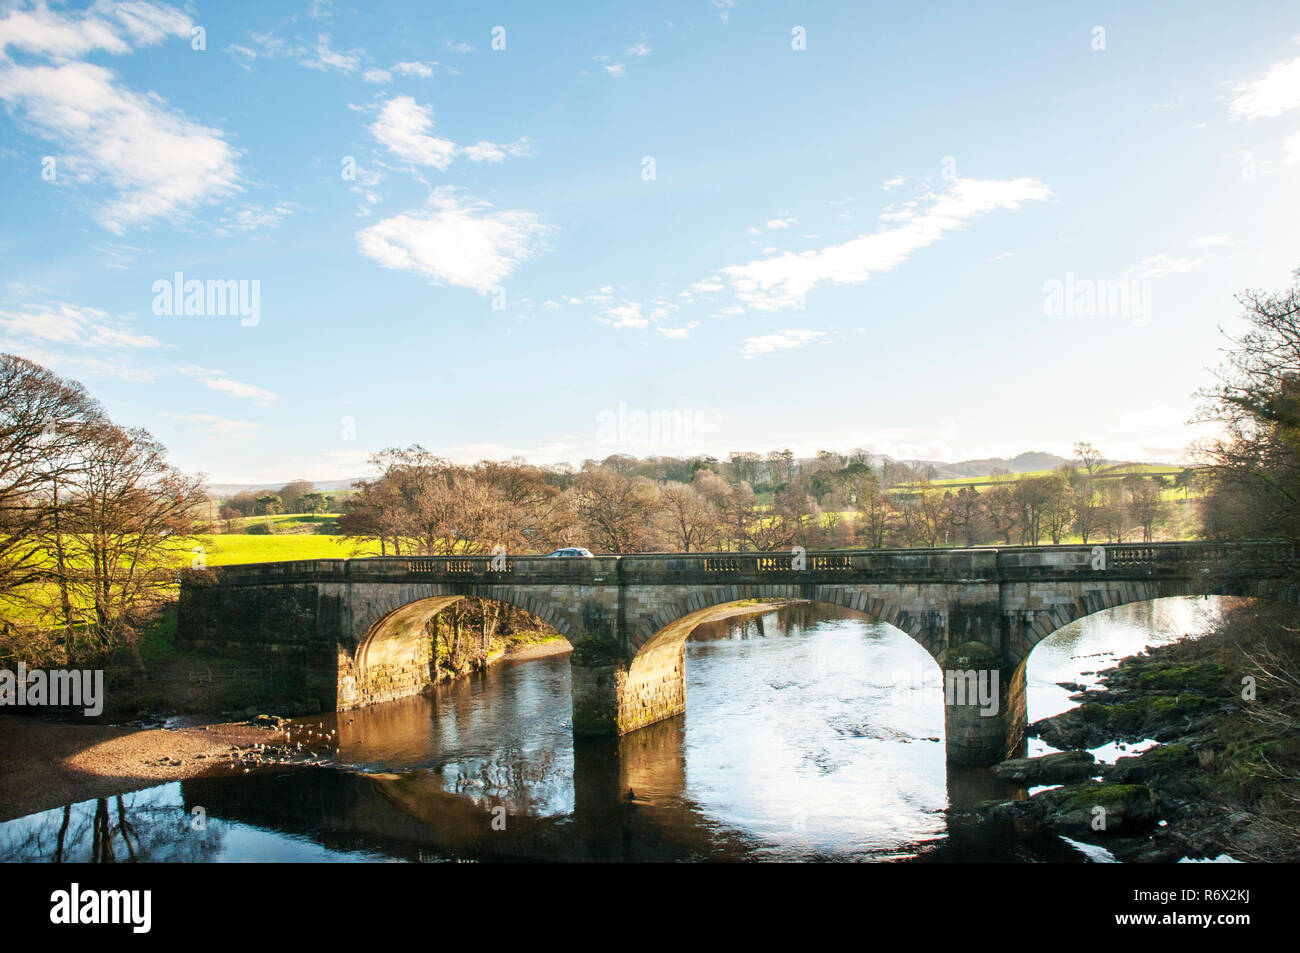 Three arch stone bridge over the river Lune at the Crook of Lune Caton Lancaster Lancashire England UK Stock Photo